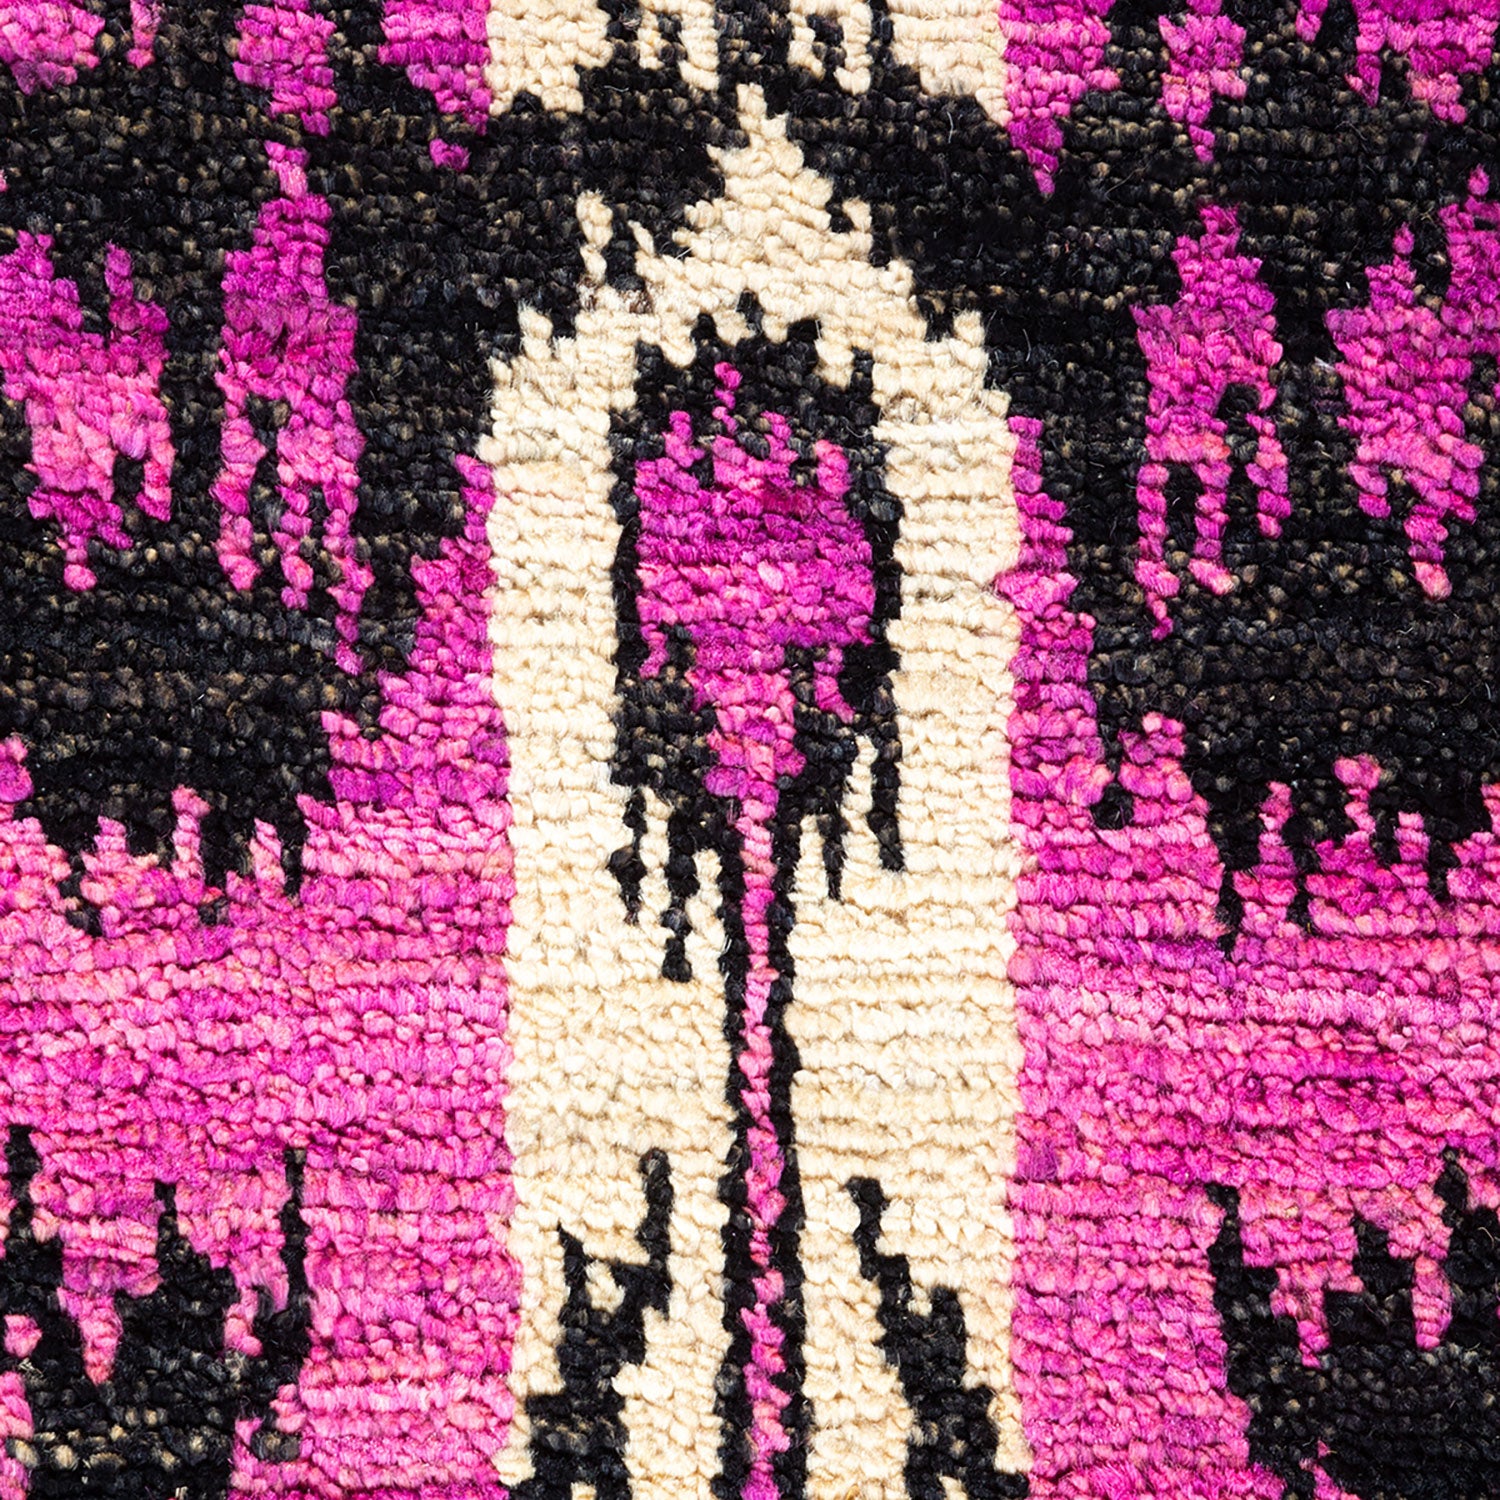 Vibrant abstract pattern with pink, black, and cream colors showcased.